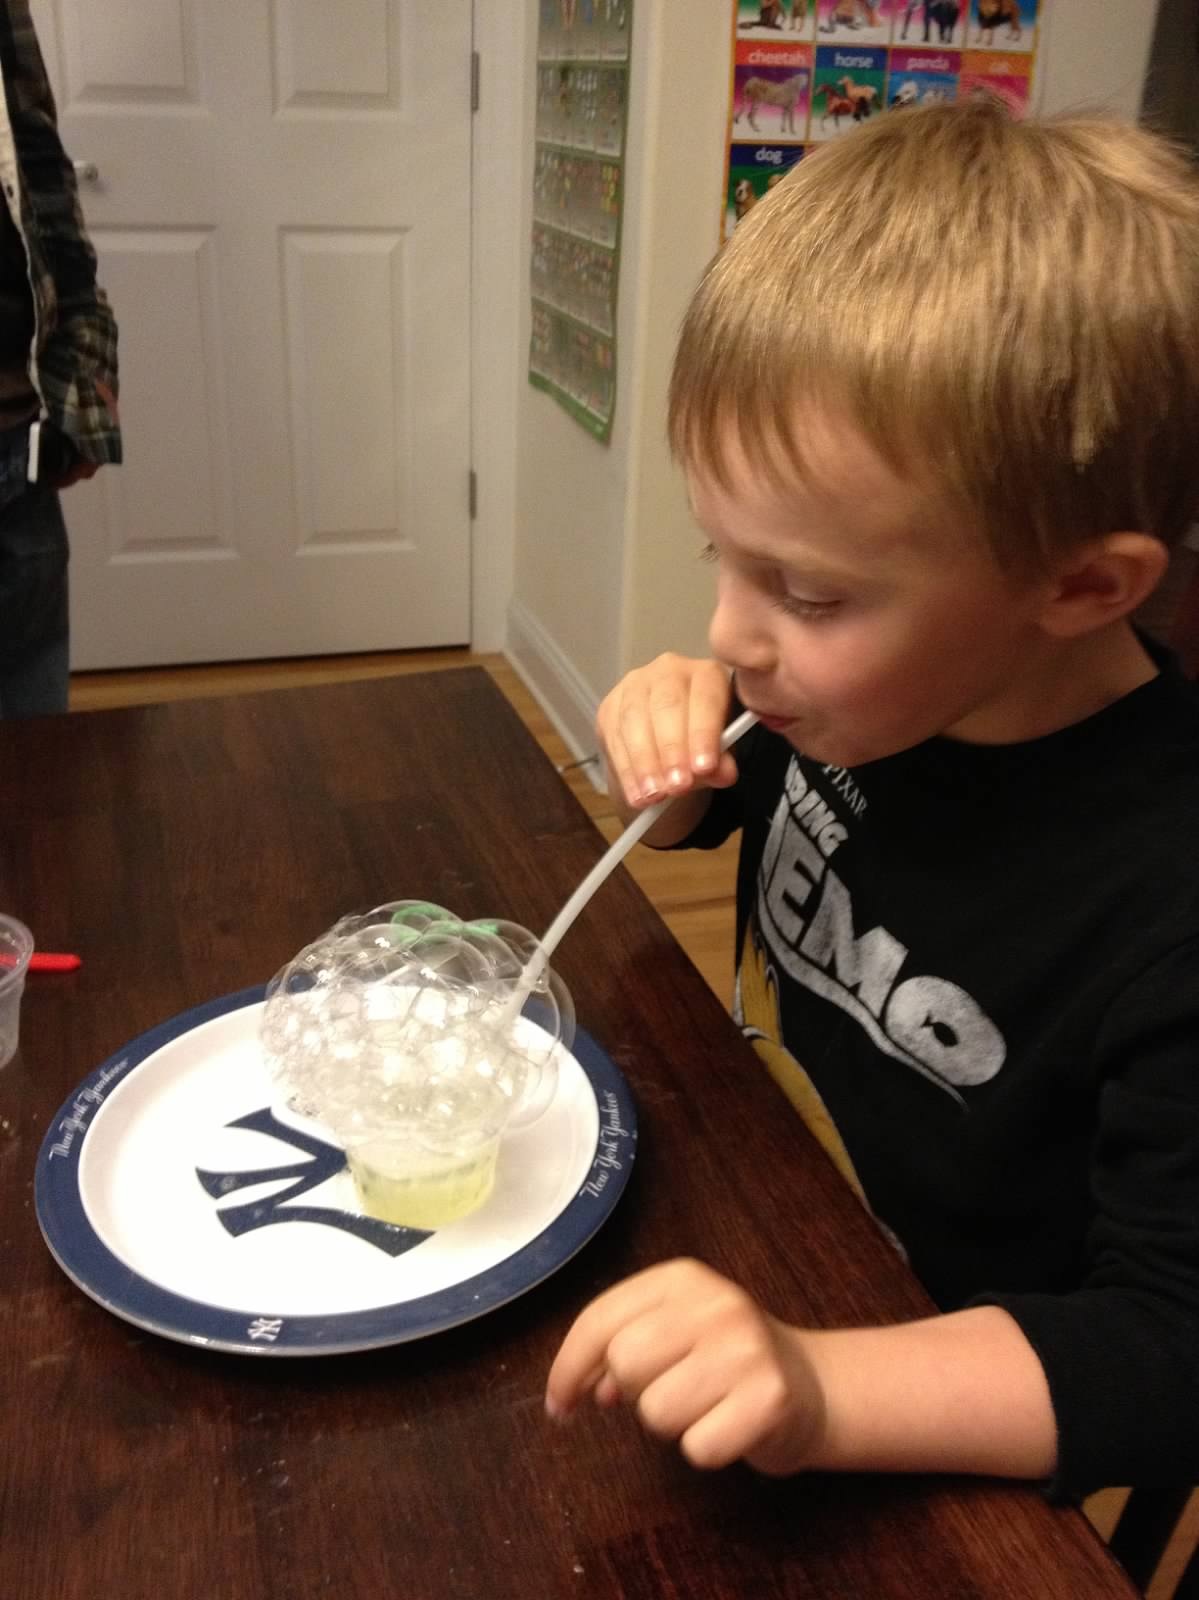 Children learn so much from conducting science experiments!